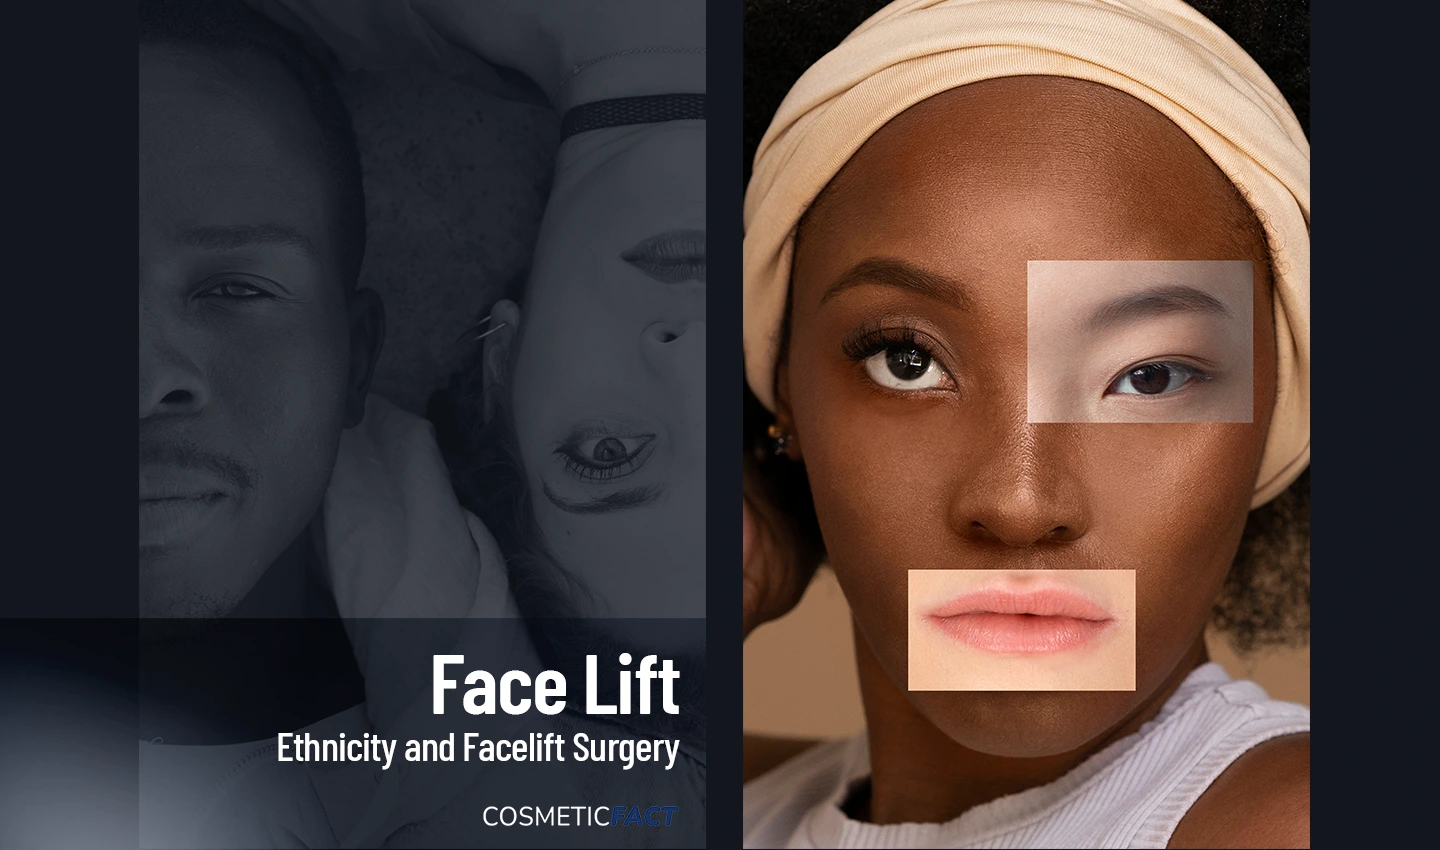 Black woman imagining white skin on her face, representing unique facelift concerns based on ethnicity.